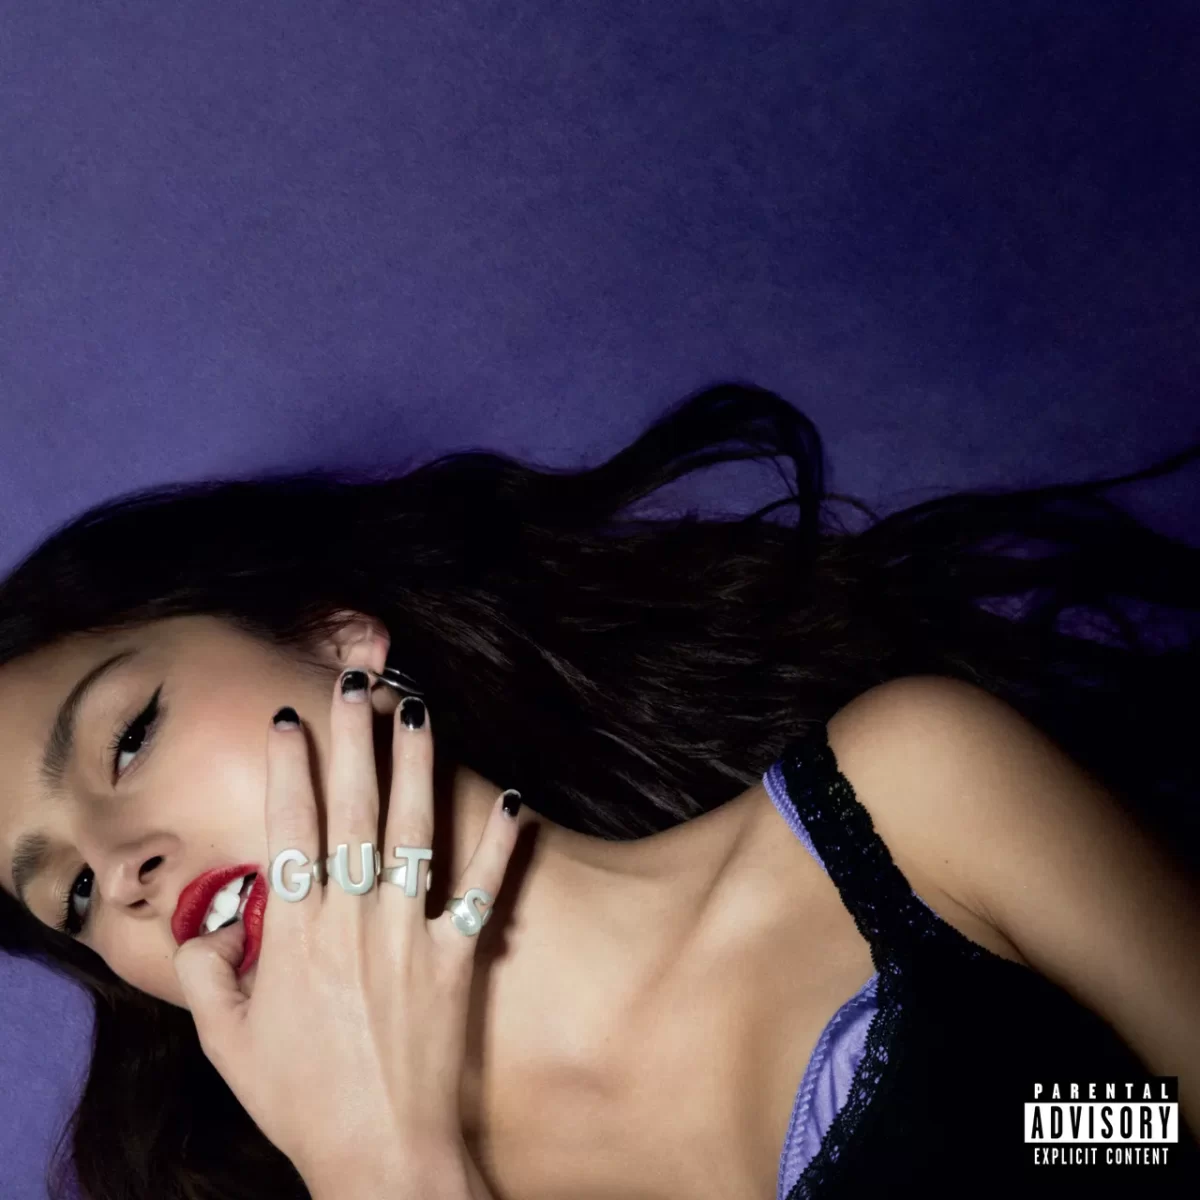 This soft girl gets an edge, Olivia Rodrigo goes from wanting her ex back to hating her ex. Getting some spunk added to her new album GUTS, but does it compare to her previous album SOUR. (Courtesy of Apple Music)